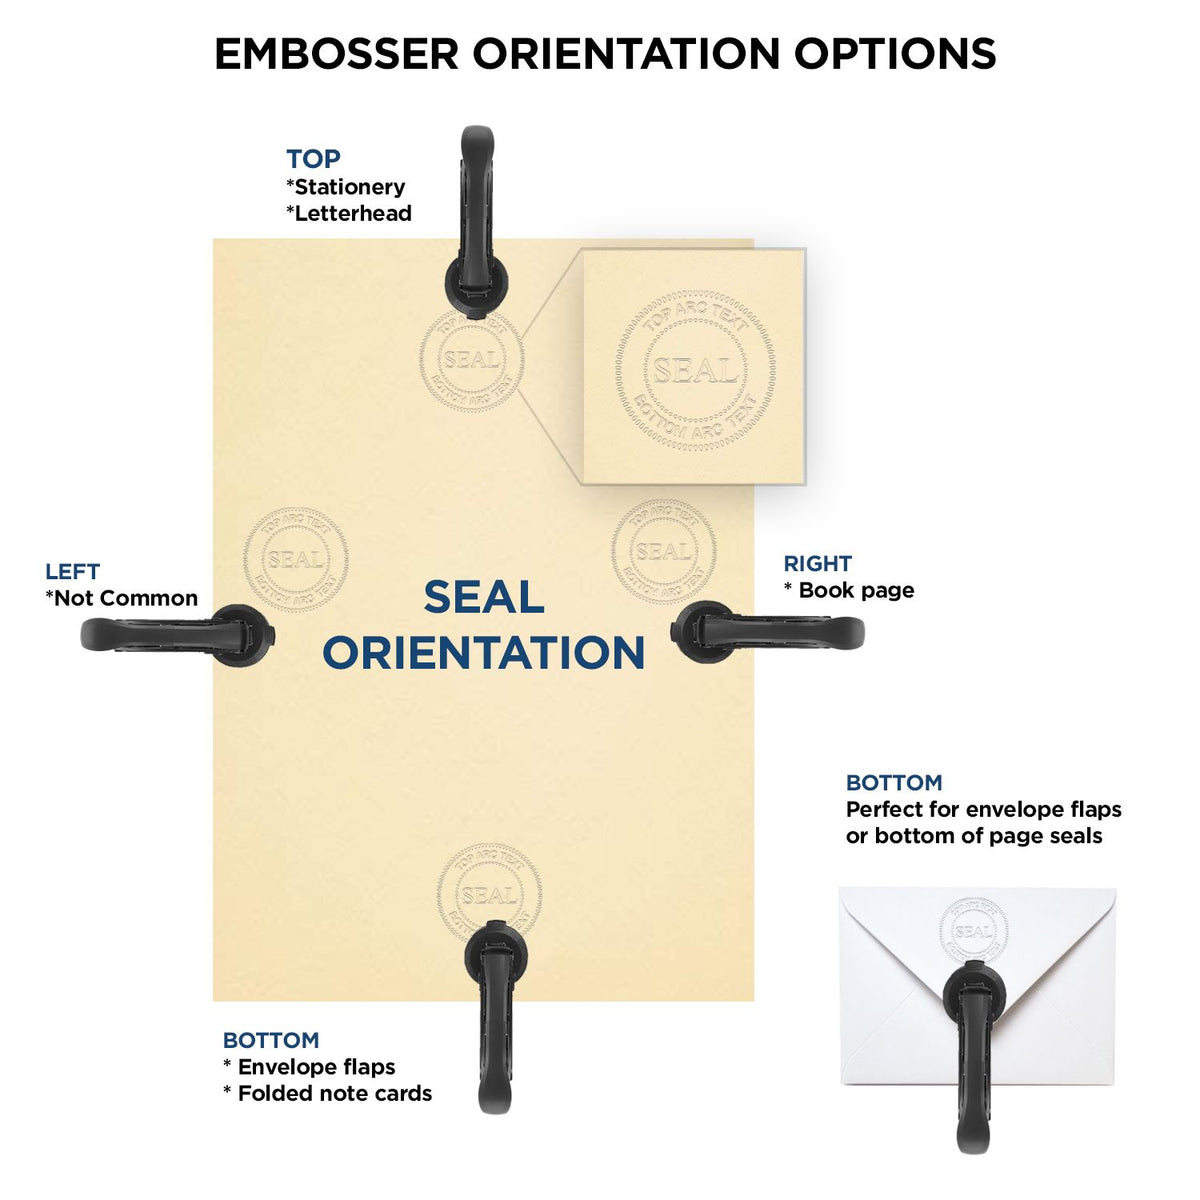 An infographic for the Soft North Carolina Professional Engineer Seal showing embosser orientation, this is showing examples of a top, bottom, right and left insert.